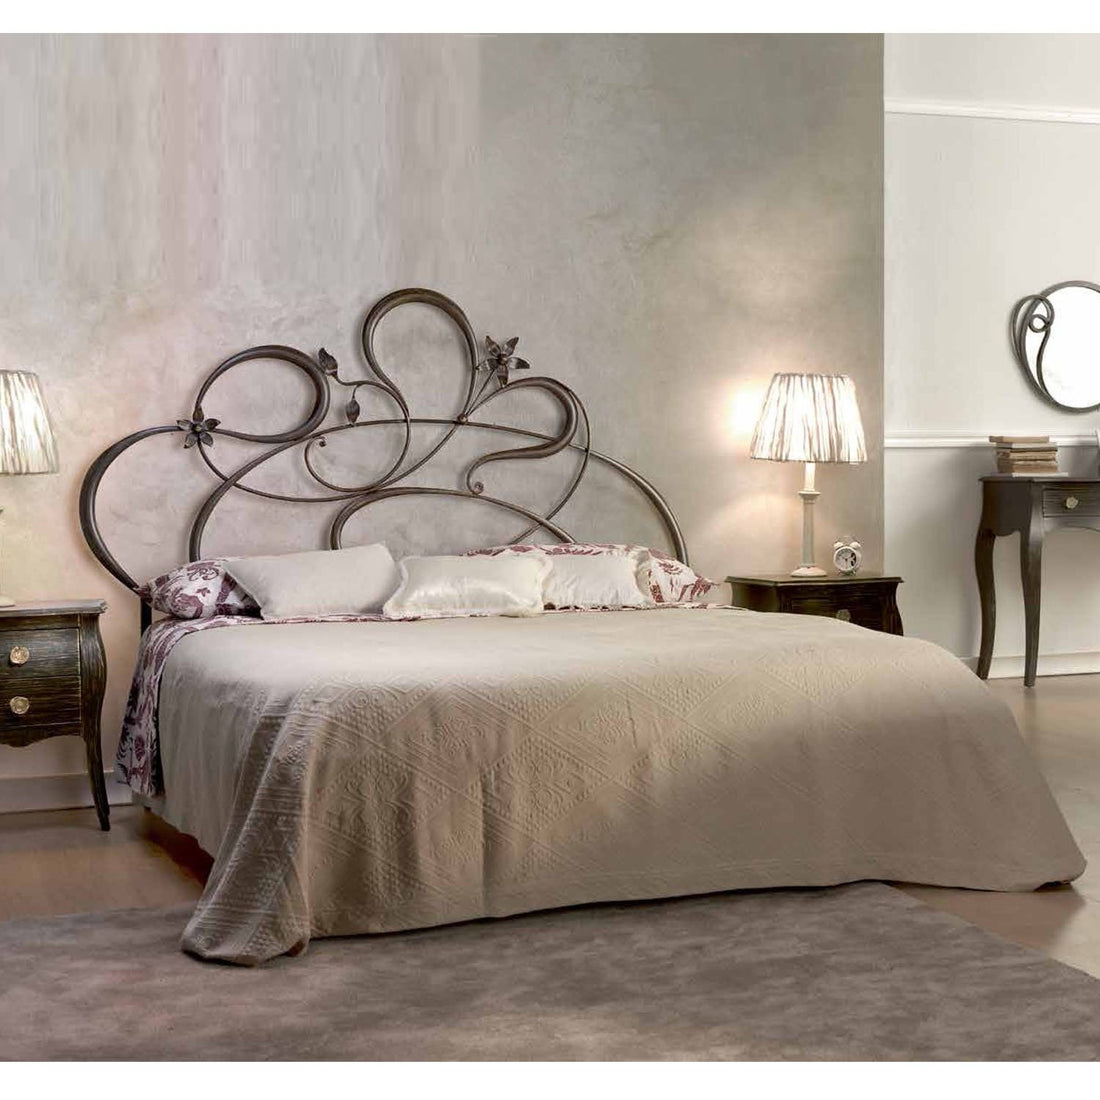 Why Bed in Wrought Iron Is a Wise Investment?